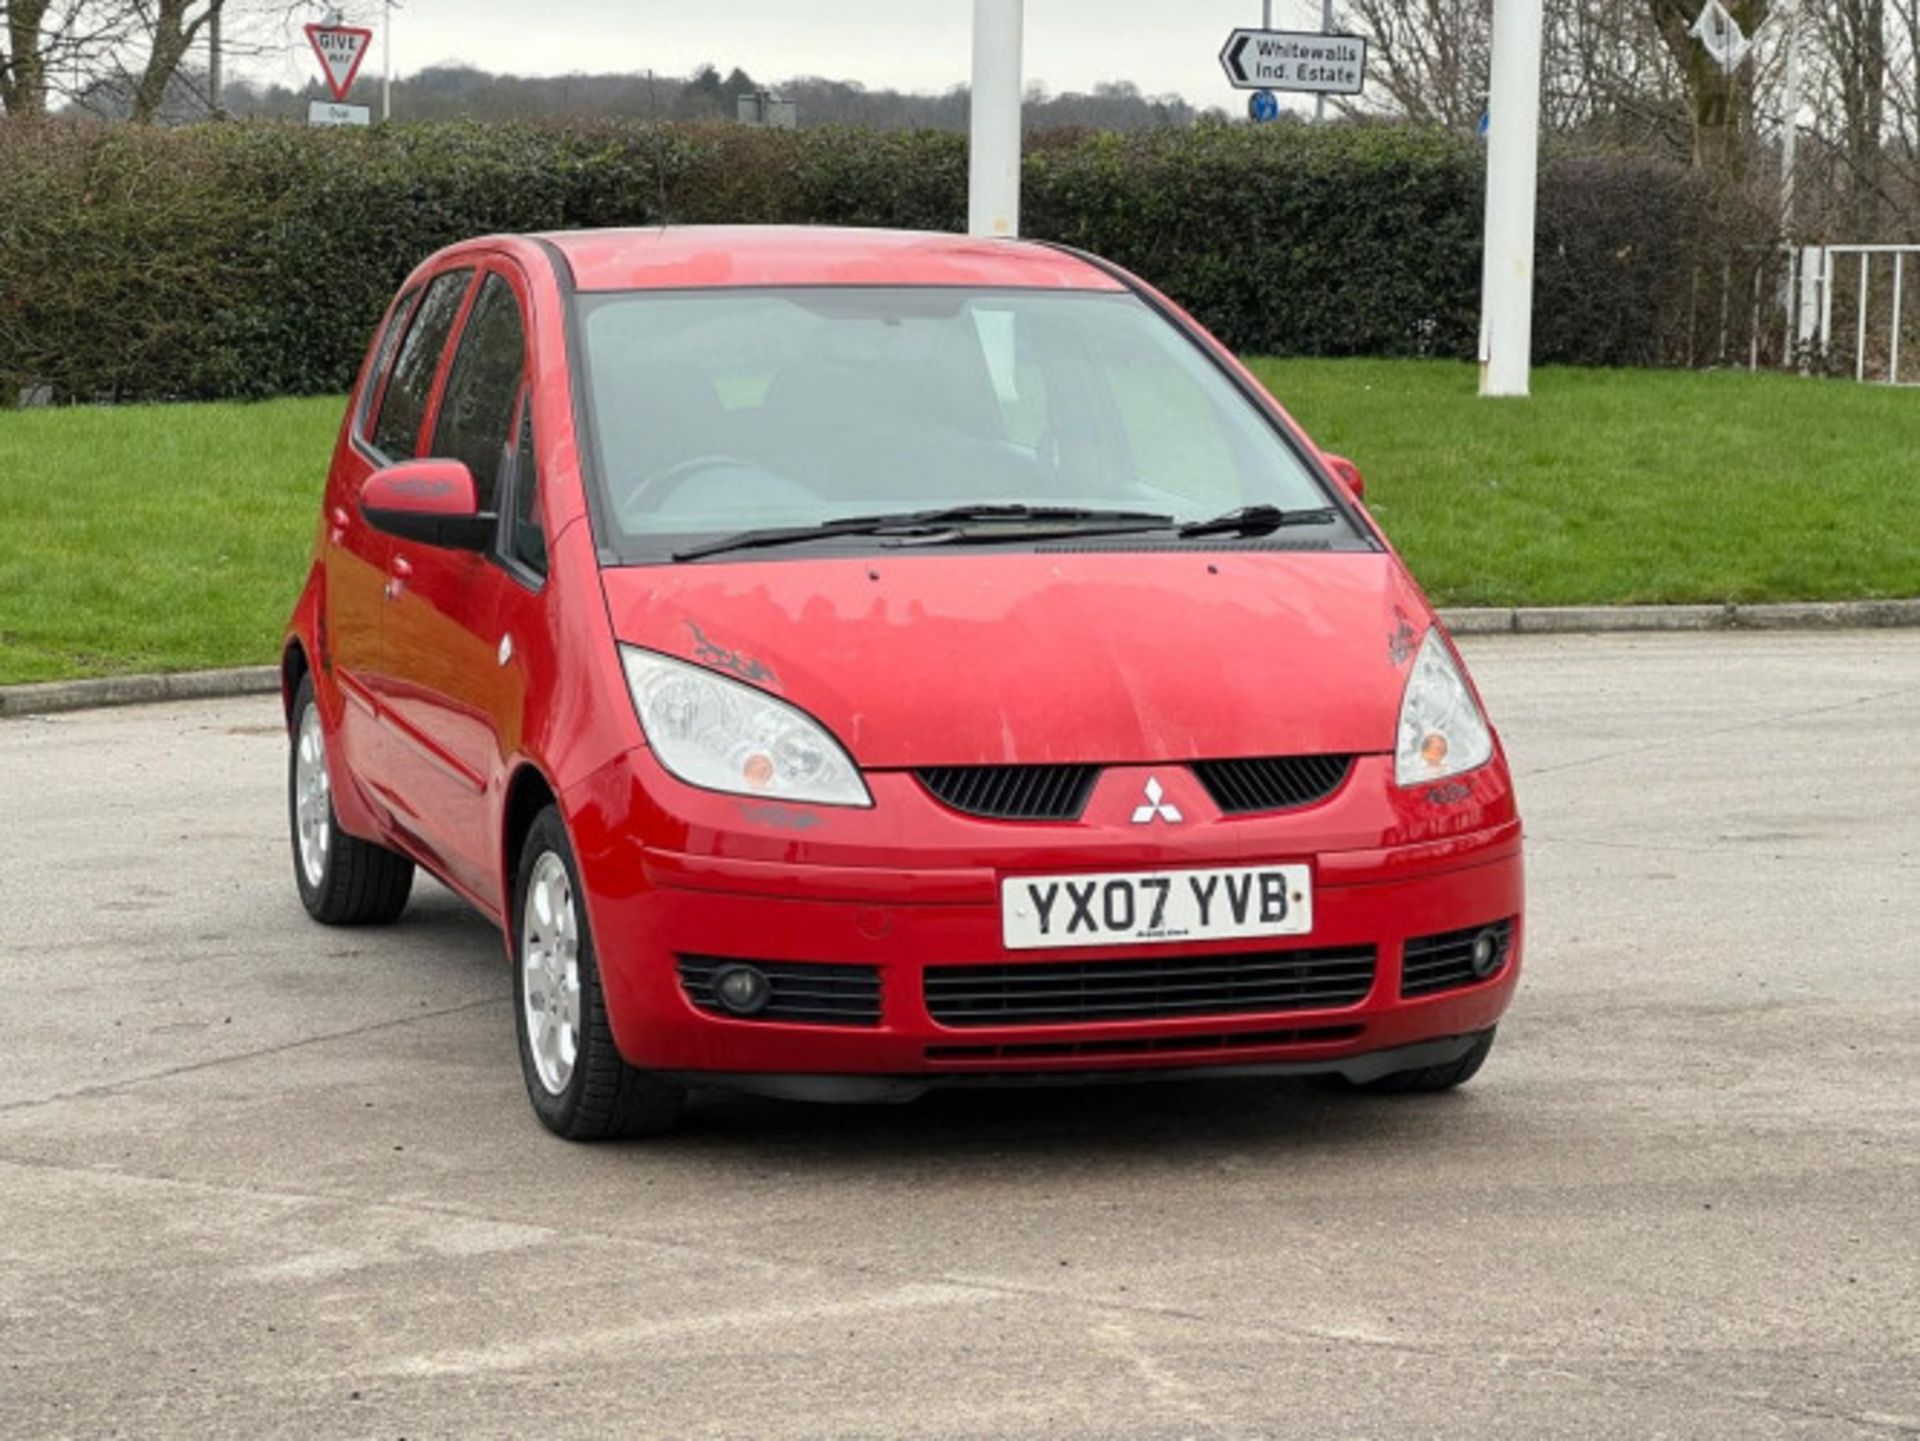 2007 MITSUBISHI COLT 1.5 DI-D DIESEL AUTOMATIC >>--NO VAT ON HAMMER--<< - Image 186 of 191